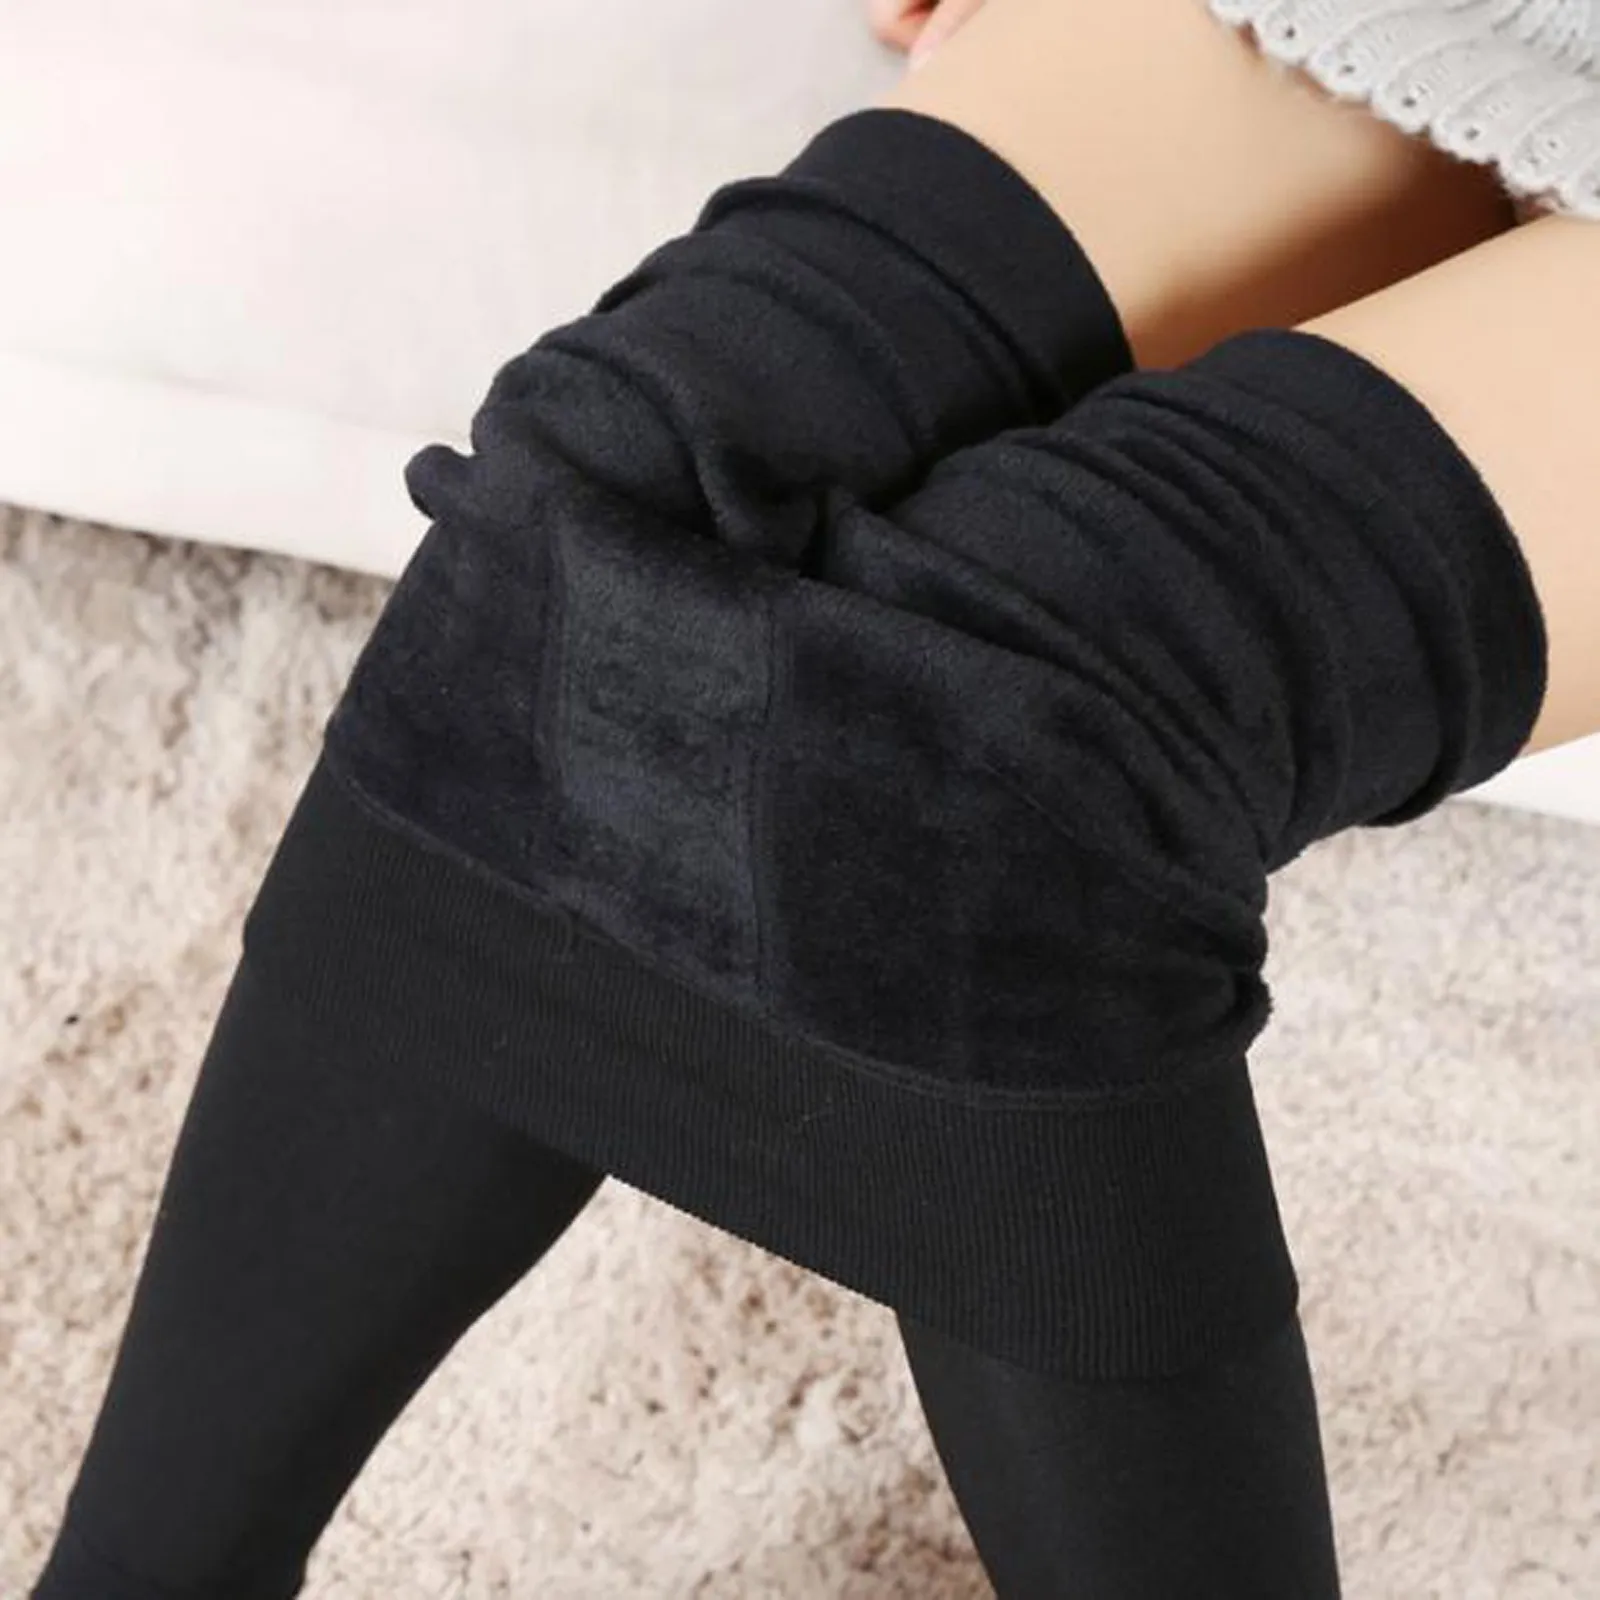 Winter Warm Legging Trousers Solid Women Velvet Thick Leggings Pants High Waist Elastic Tight Female Workout Cropped Underwear xisteps new 2020 corduroy warm elastic high waist corduroy women pants female wide leg loose elegant solid color winter trousers